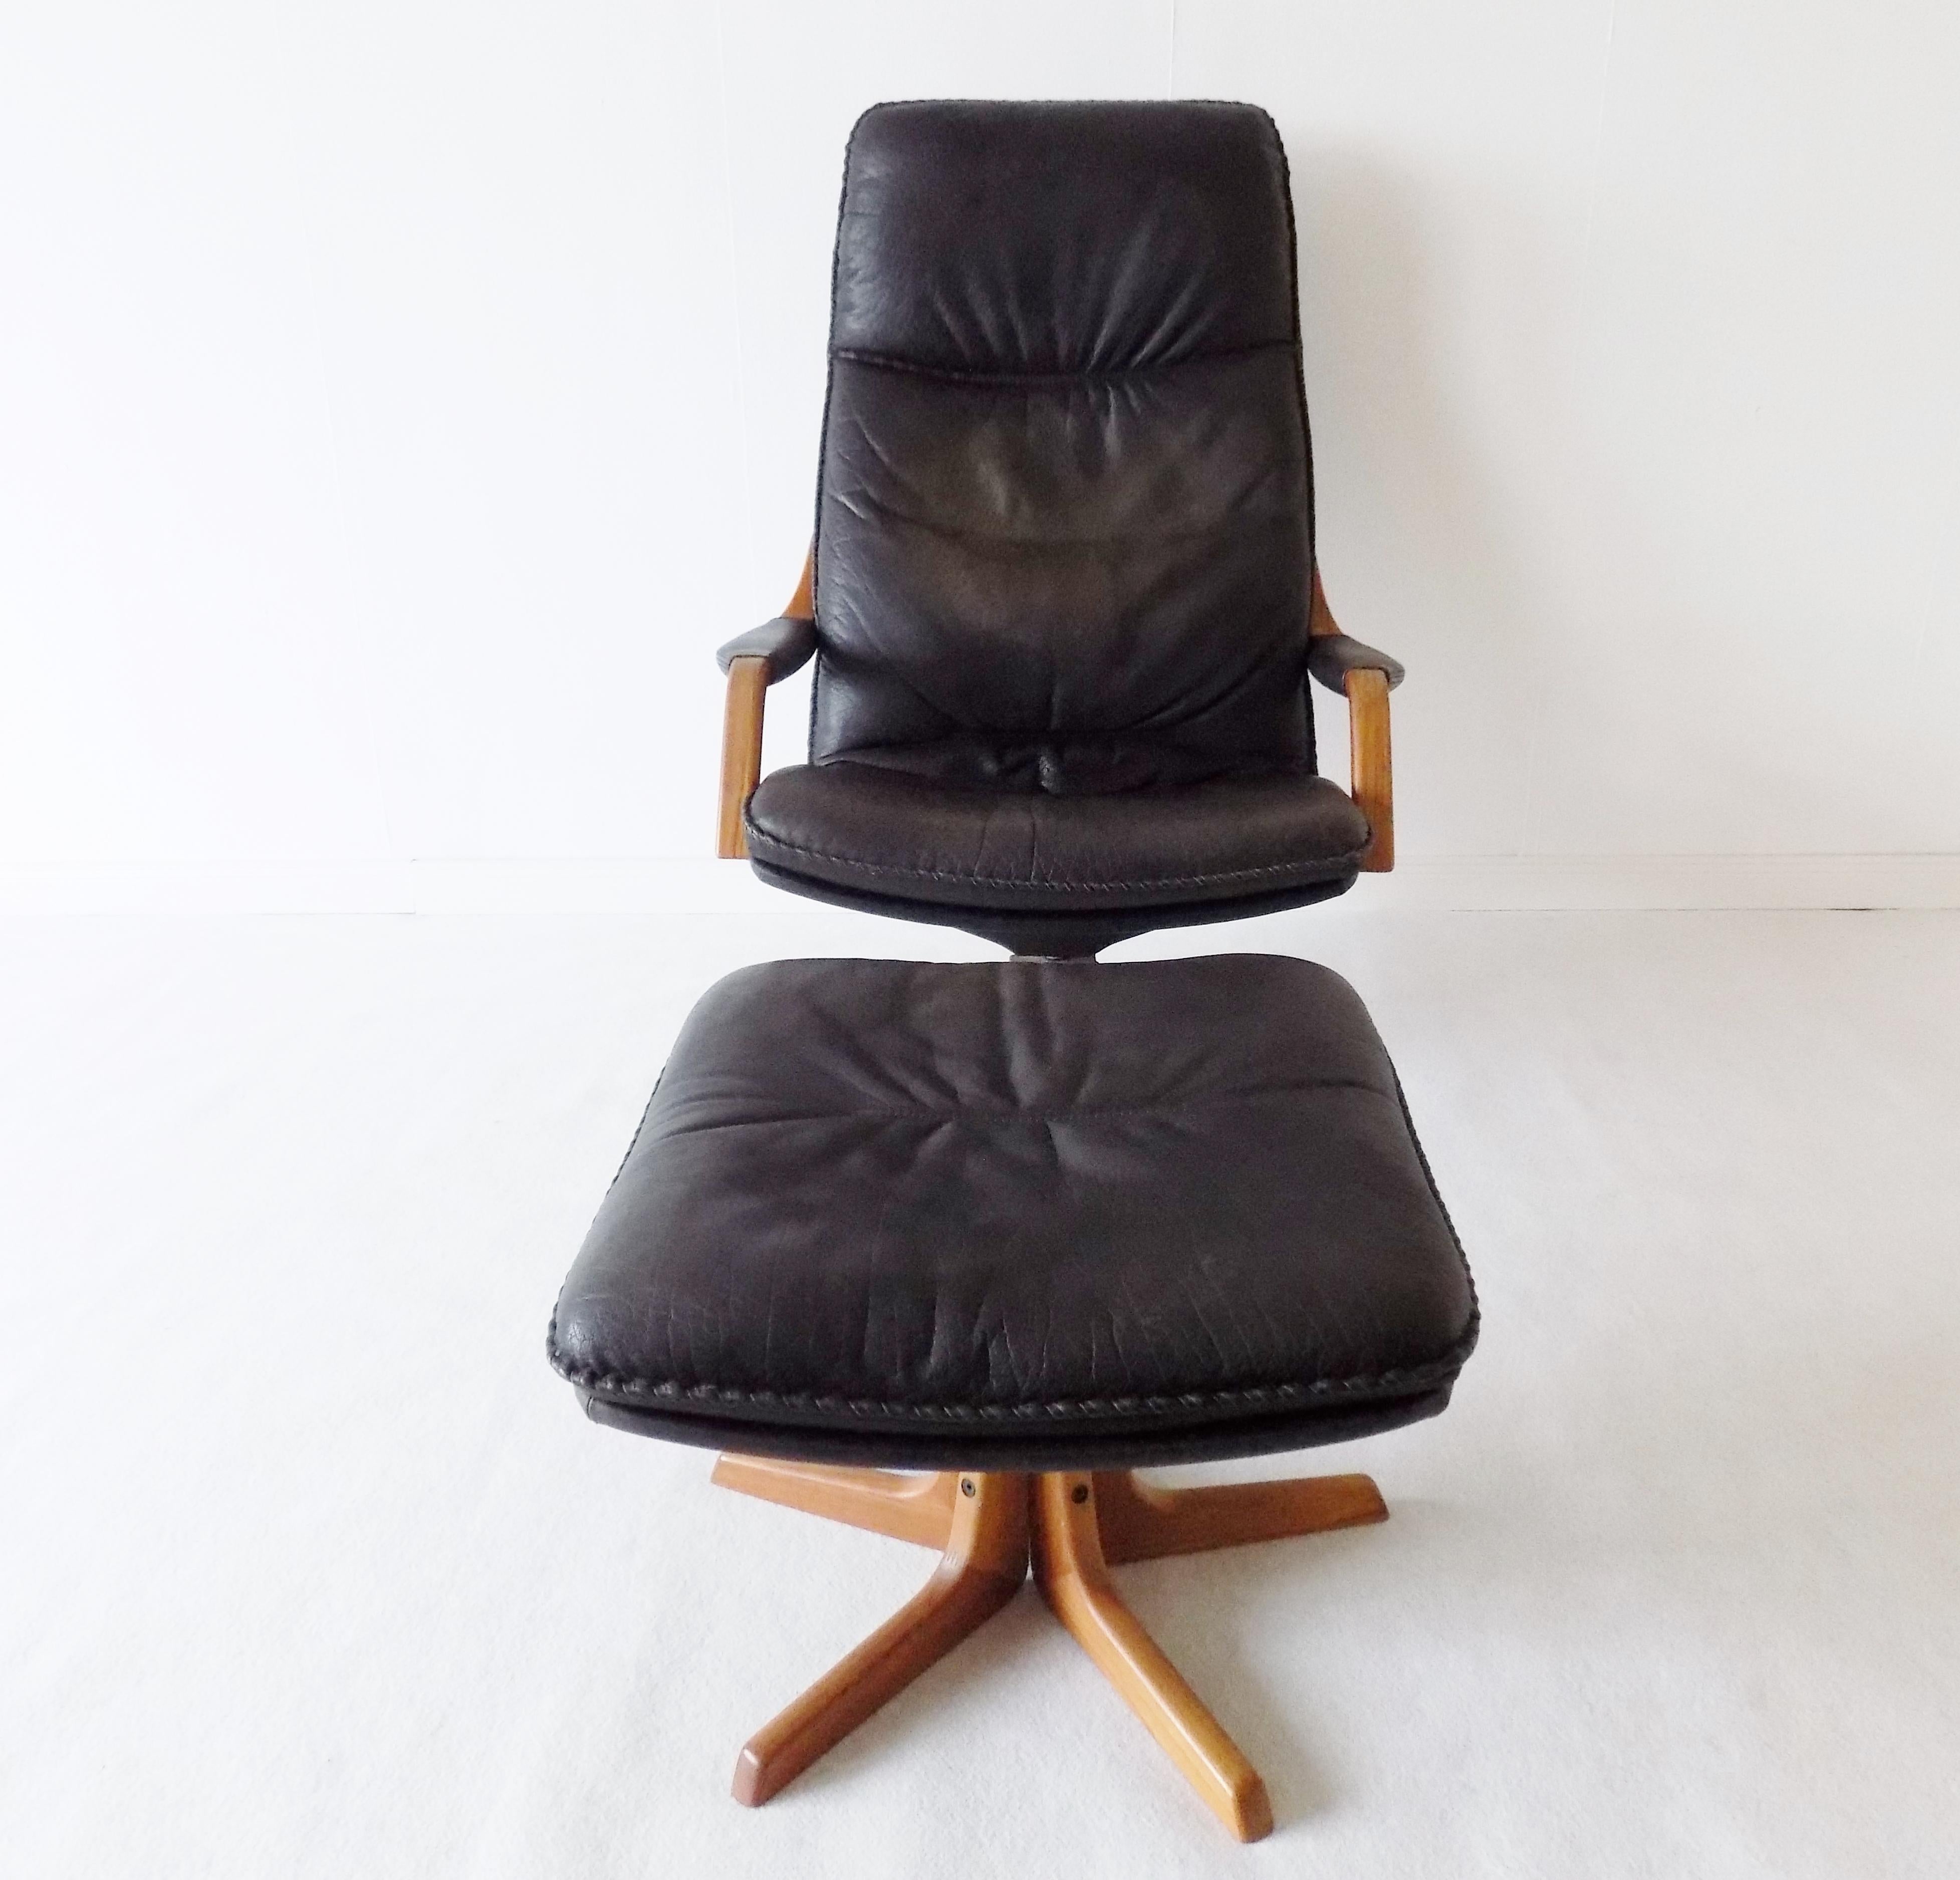 Berg Furniture Danish leather lounge chair with ottoman, Mid-Century Modern, swivel, adjustable.

This Berg lounge chair, from the early years of Berg furniture end of the 1970s, comes in very good condition. The thick, in elephant grey kept,